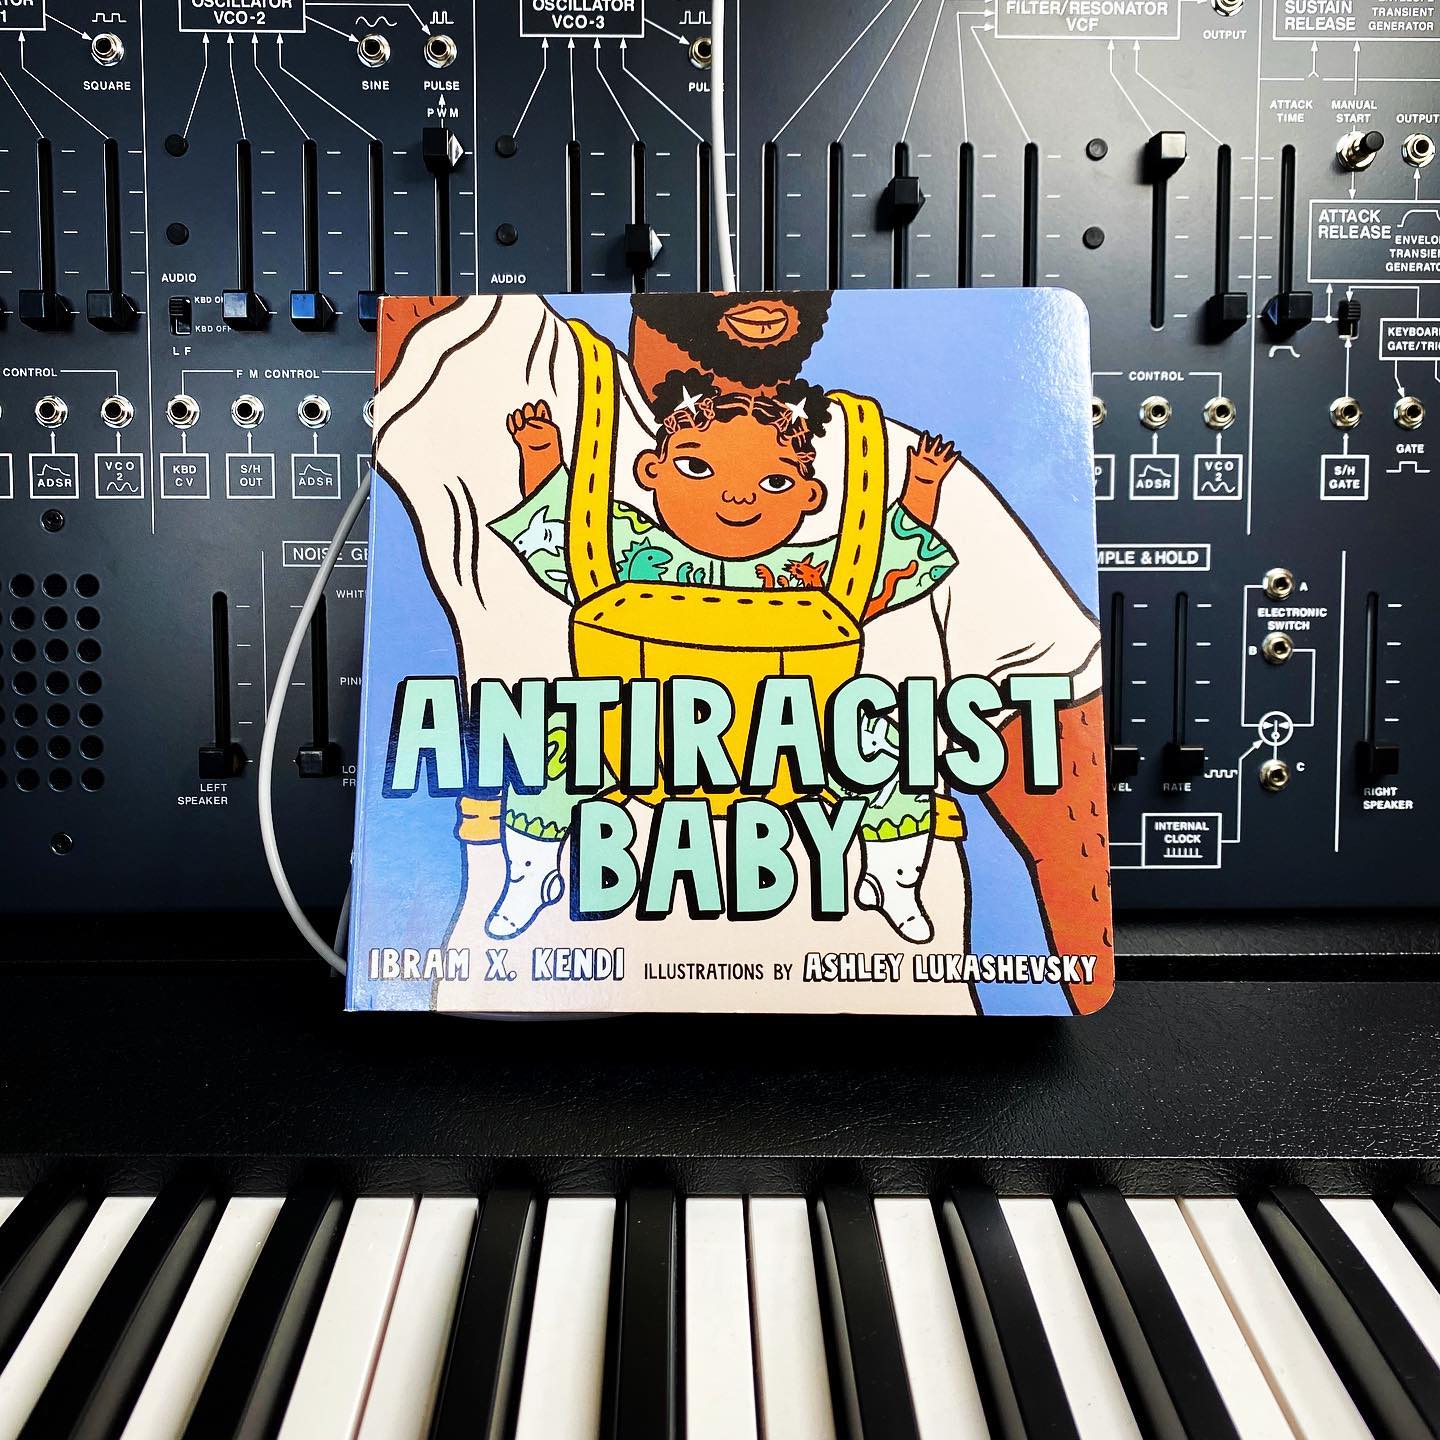 “Antiracist Baby is bred, not born. Antiracist Baby is raised to make society transform.” @ibramxk #antiracistbookclub